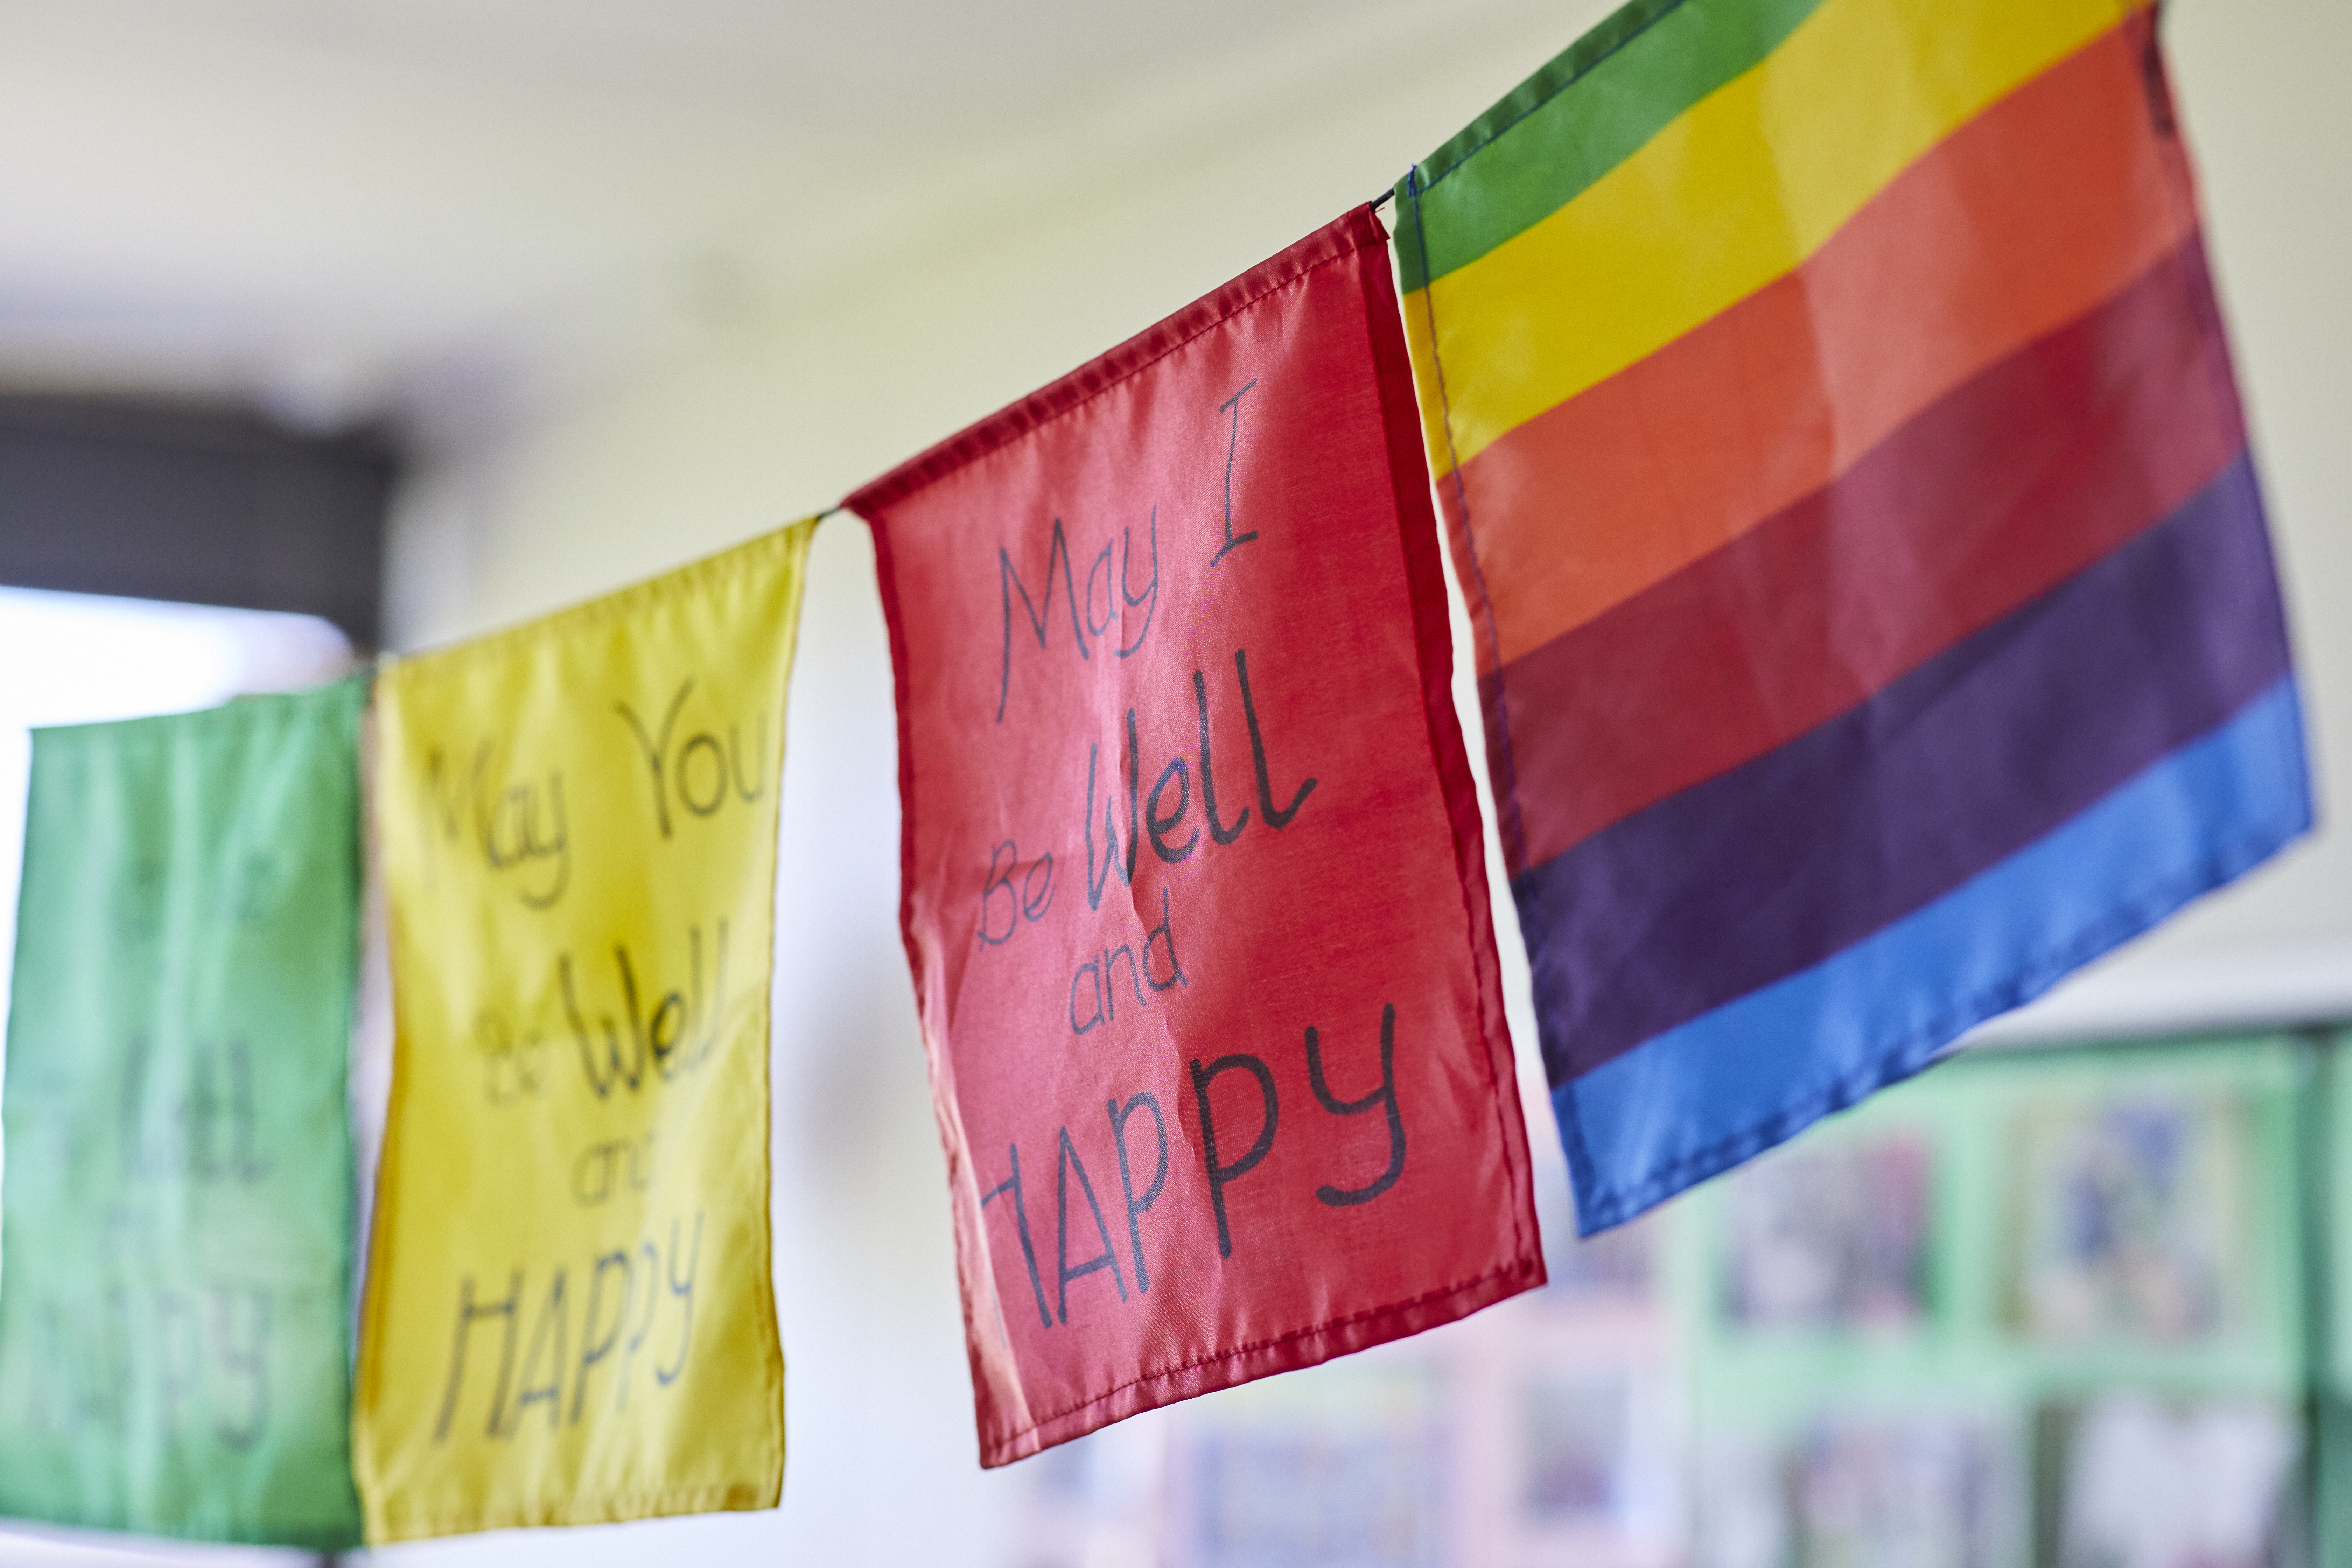 A green, yellow, red and rainbow flag hanging on a line, with may I be well and happy written on the red flag